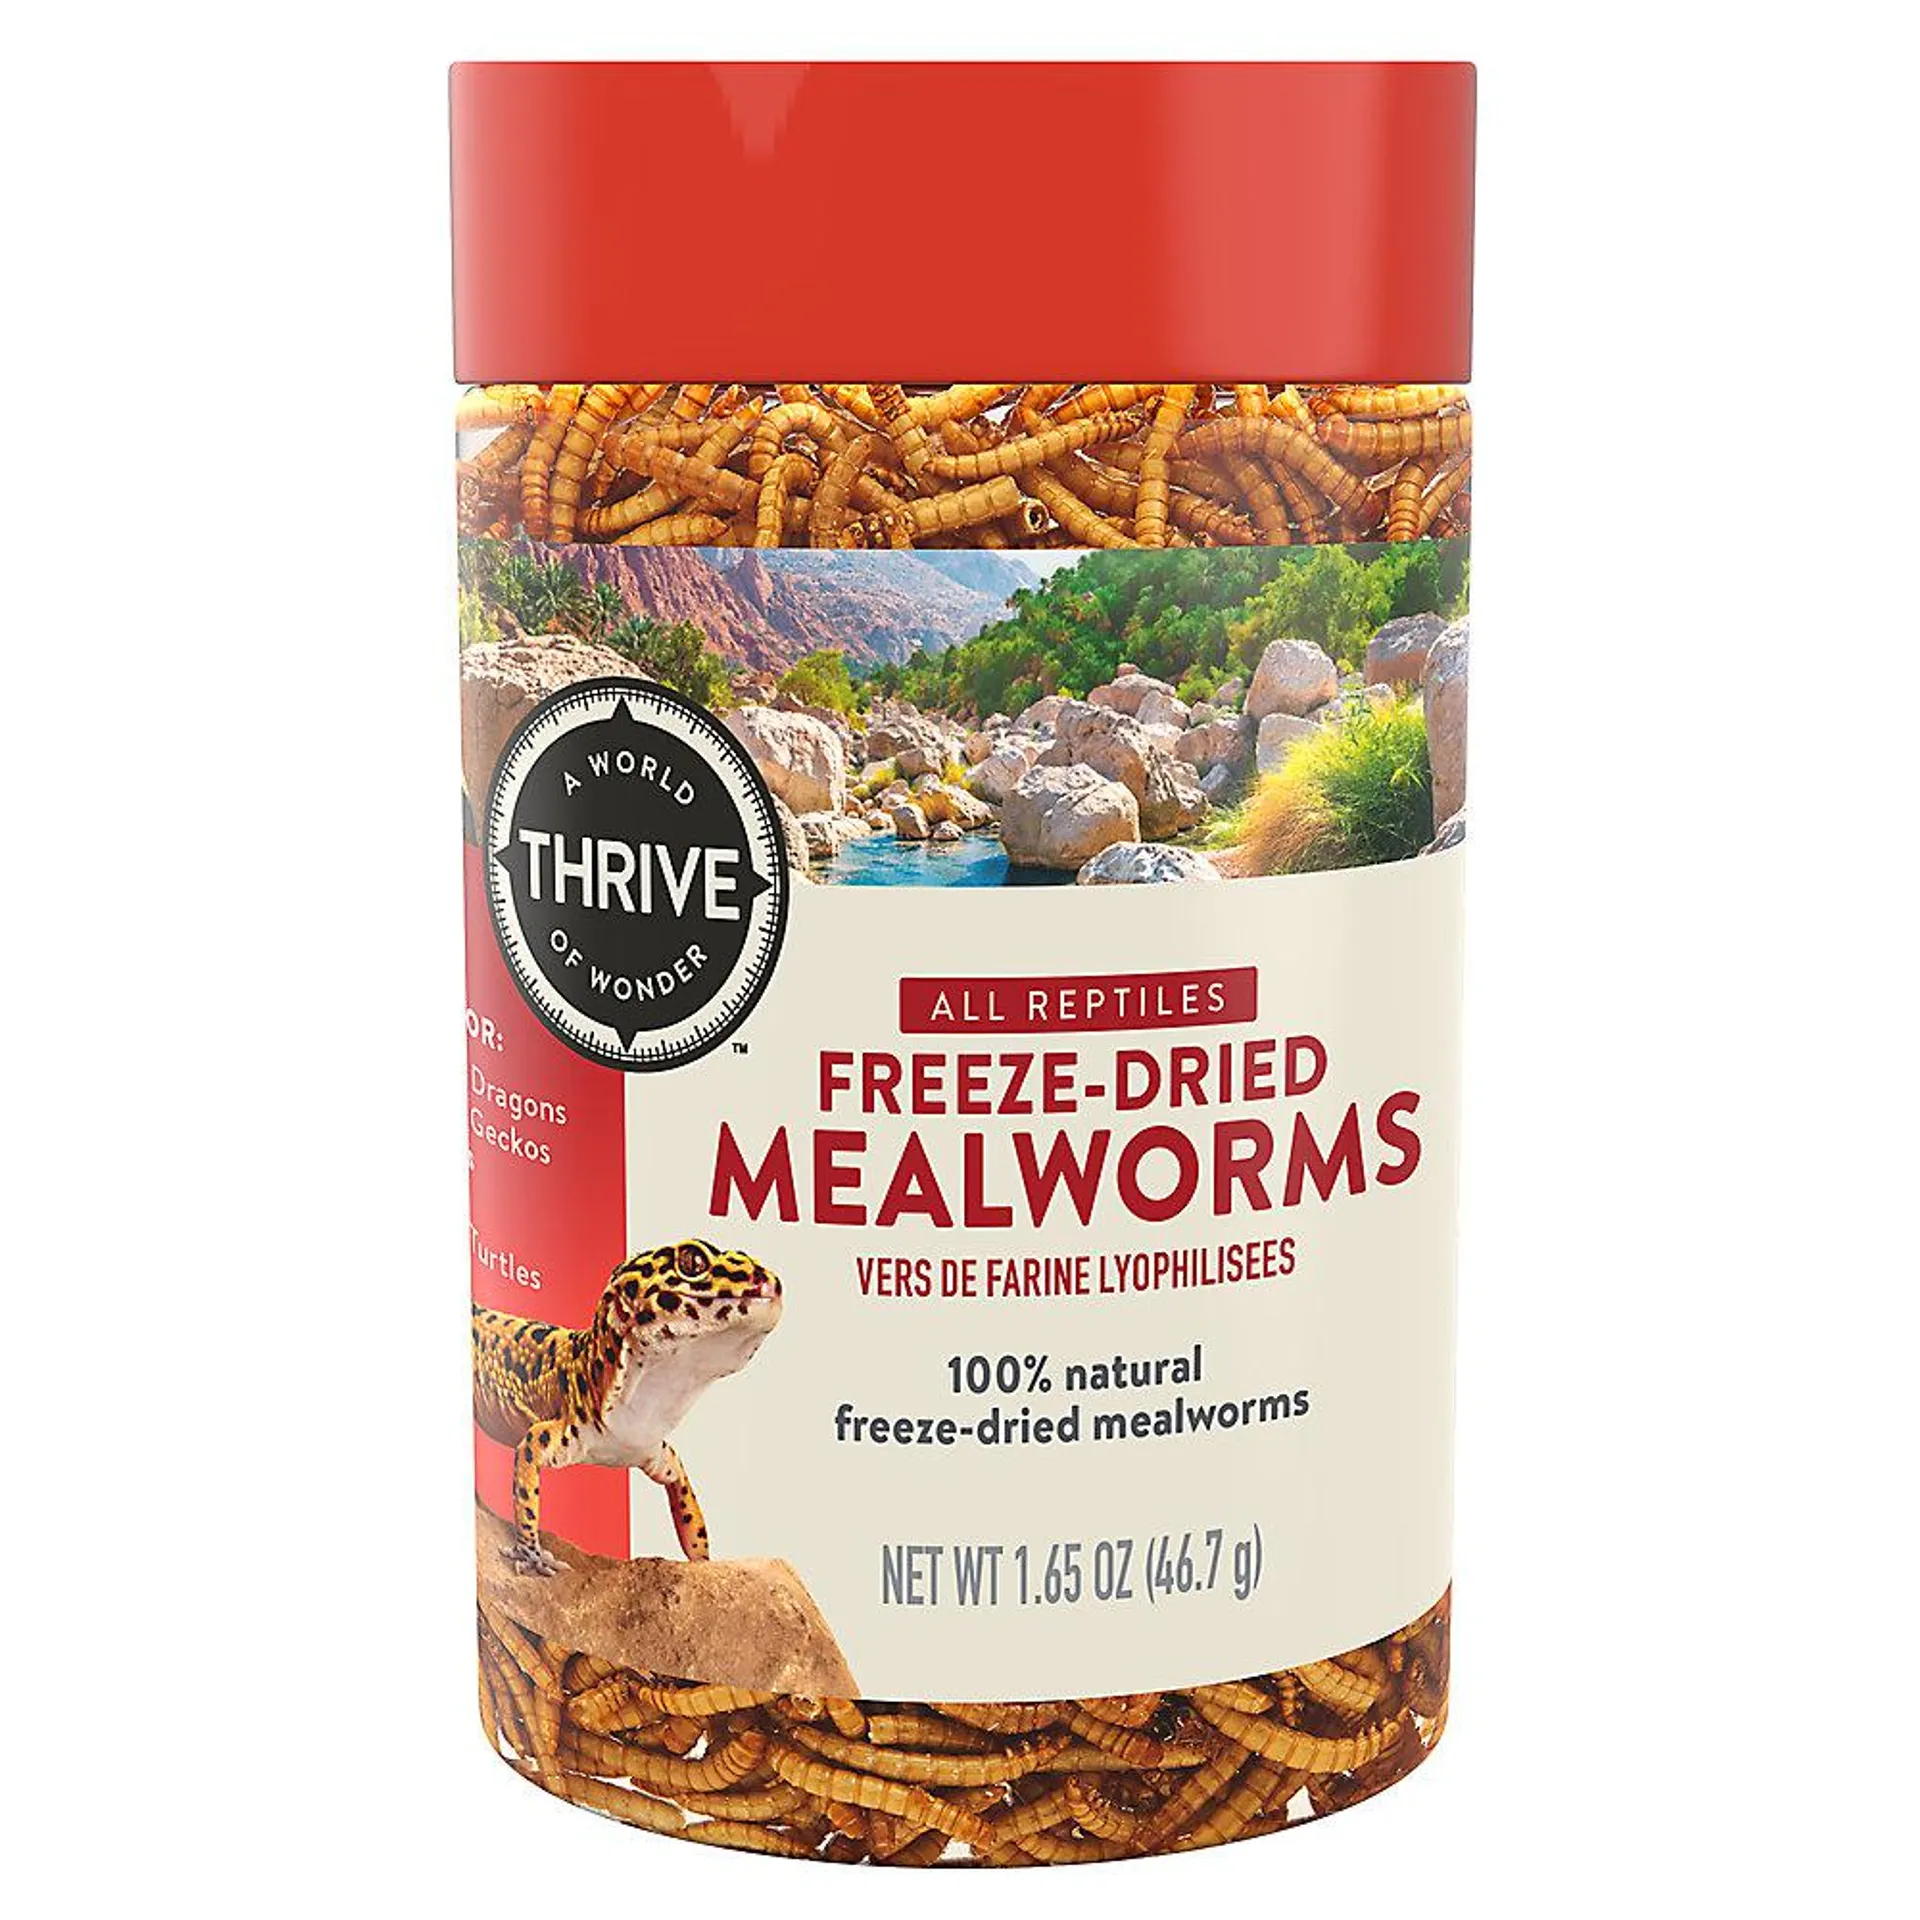 Thrive Freeze Dried Mealworms Reptile Food & Treat - Natural